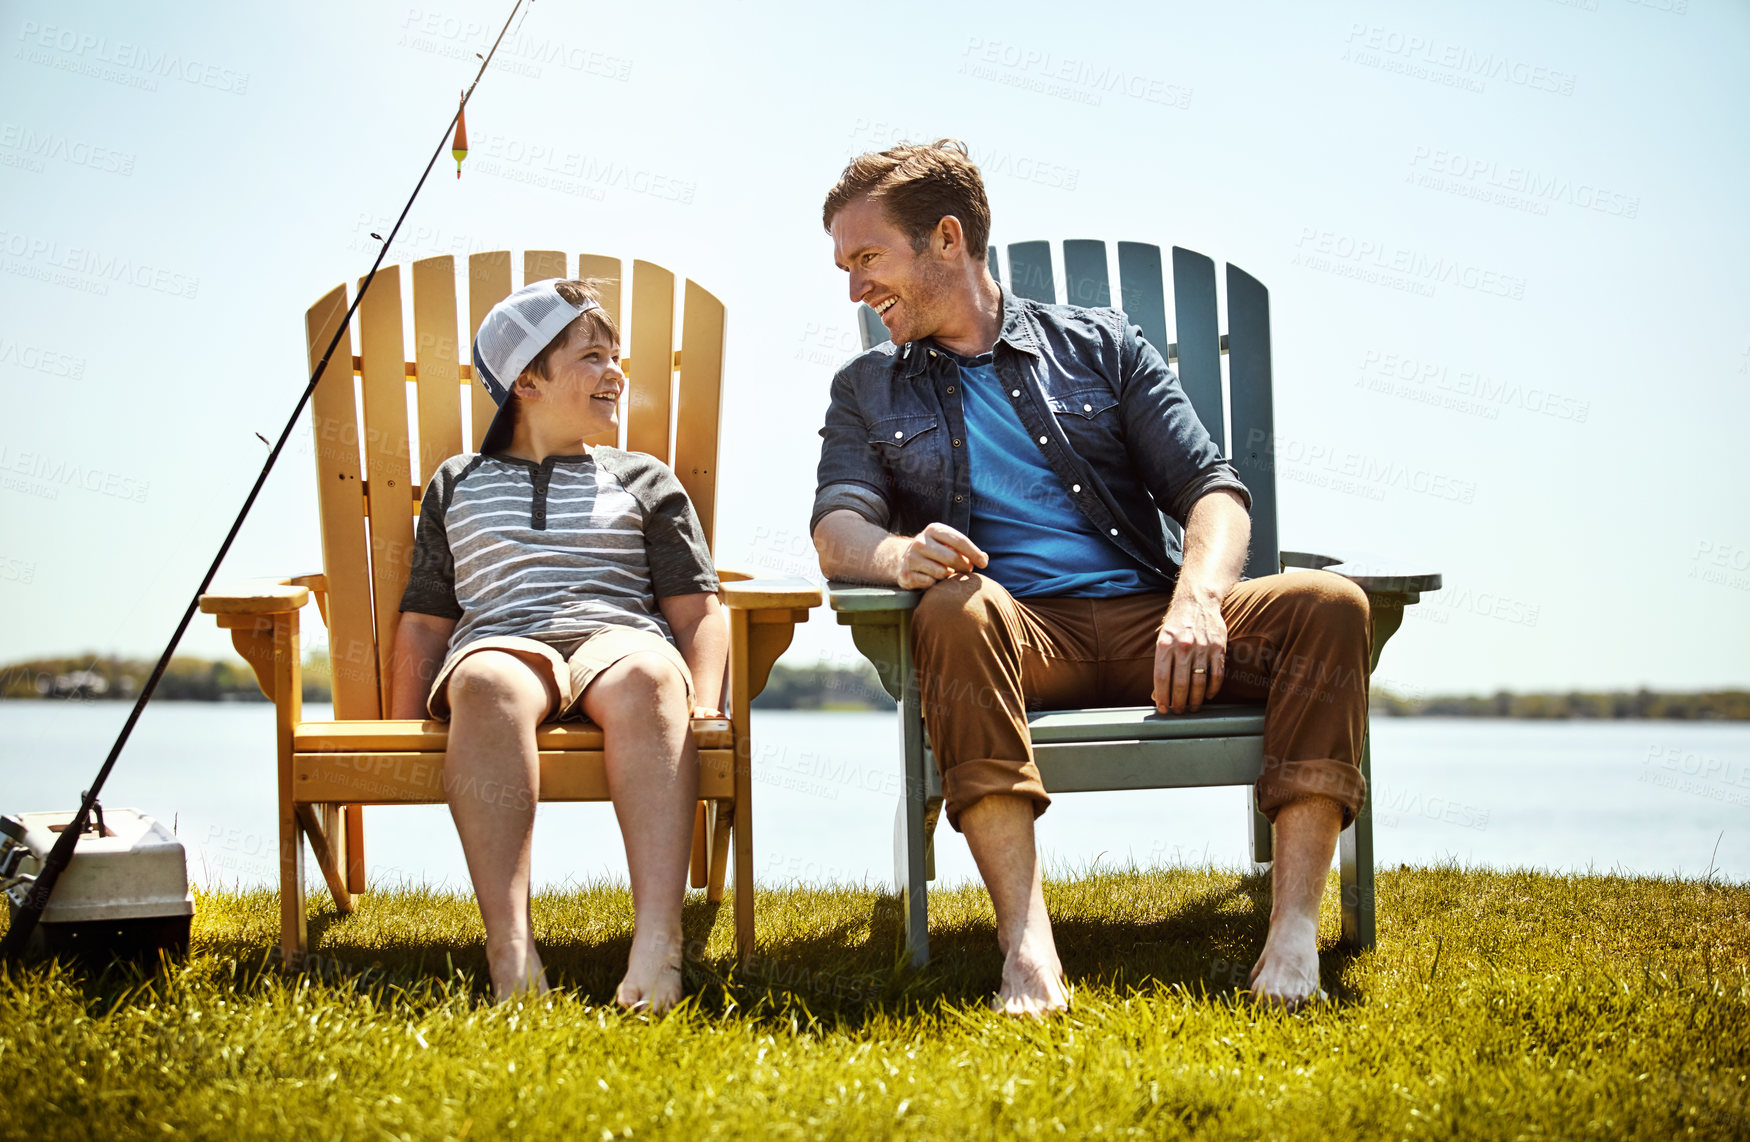 Buy stock photo Shot of a father and his little son enjoying a fishing trip together